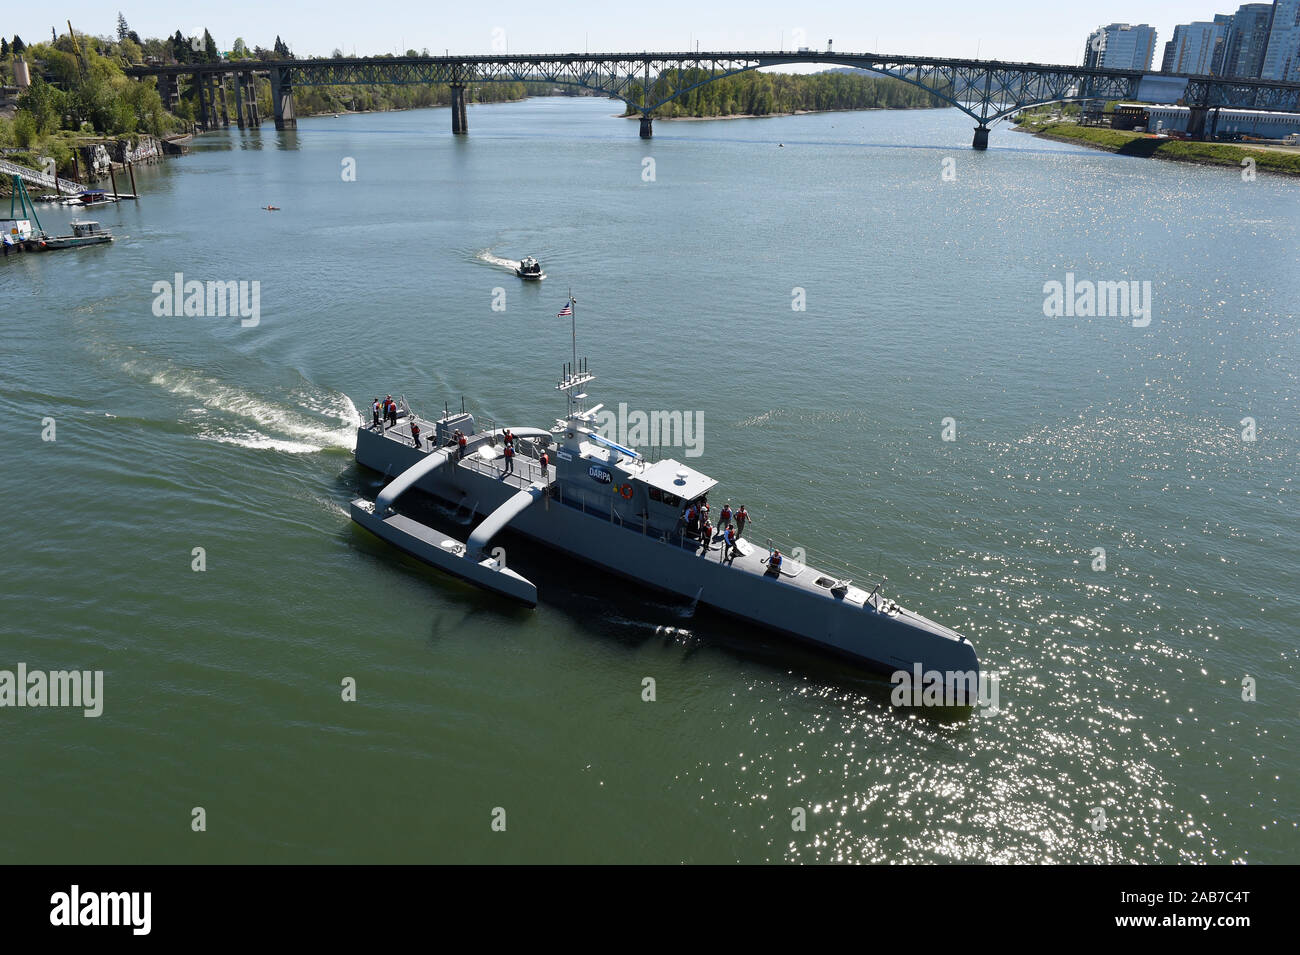 PORTLAND, Ore. (Apr. 7, 2016) Sea Hunter, an entirely new class of unmanned ocean-going vessel gets underway on the Williammette River following a christening ceremony in Portland, Ore. Part the of the Defense Advanced Research Projects Agency (DARPA)'s Anti-Submarine Warfare Continuous Trail Unmanned Vessel (ACTUV) program, in conjunction with the Office of Naval Research (ONR), is working to fully test the capabilities of the vessel and several innovative payloads, with the goal of transitioning the technology to Navy operational use once fully proven. Stock Photo